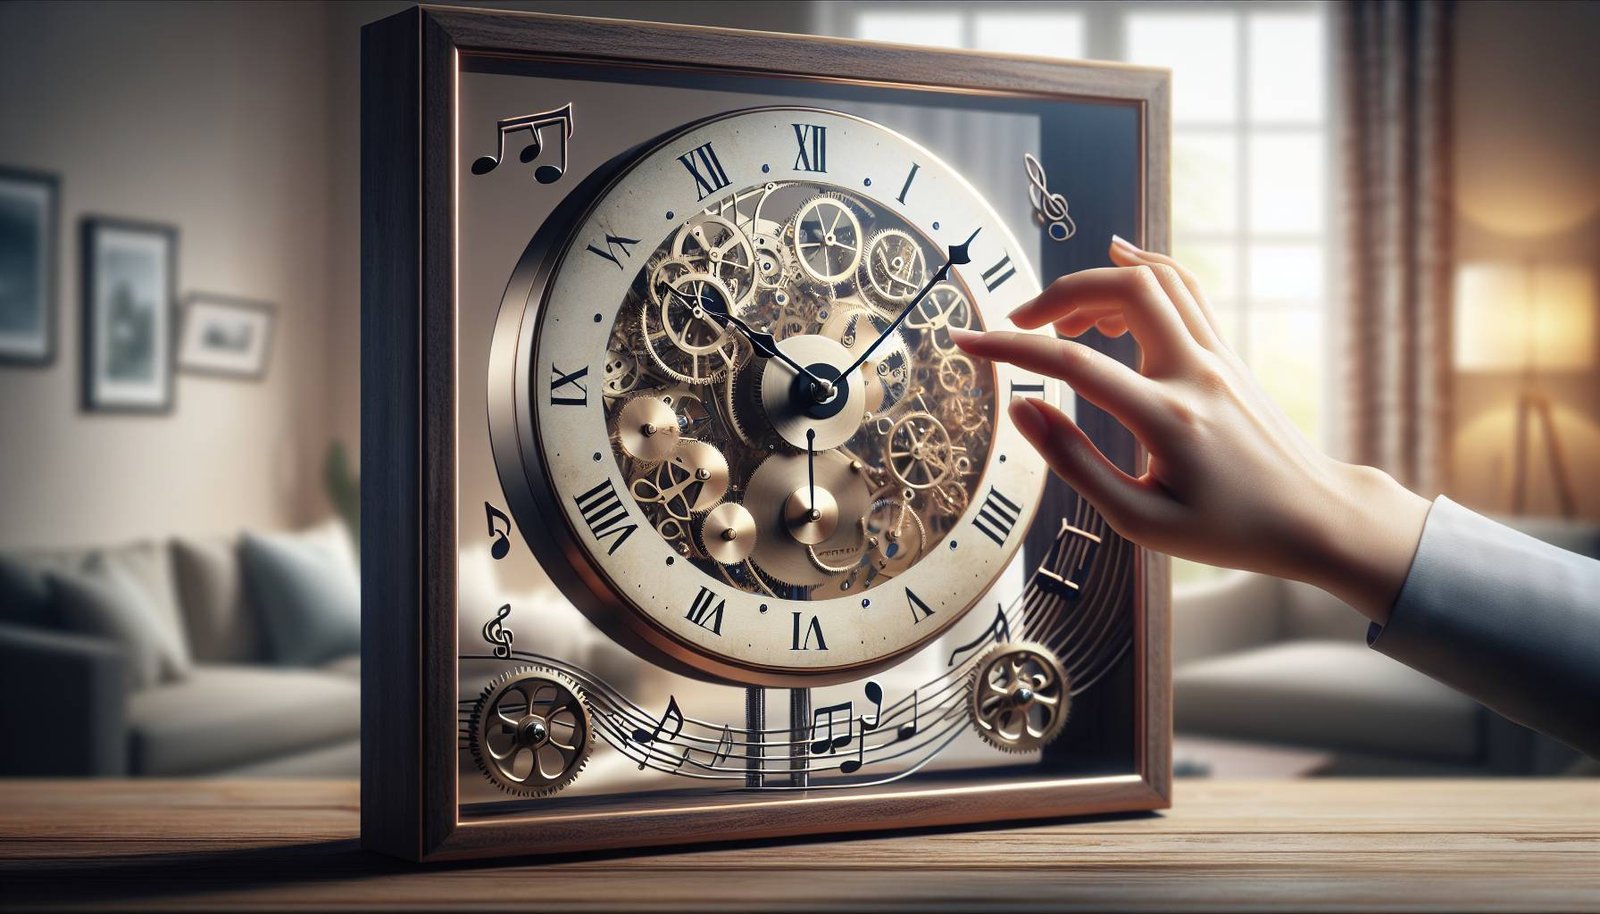 A Step-by-Step Guide to Changing the Melody on Your Musical Wall Clock